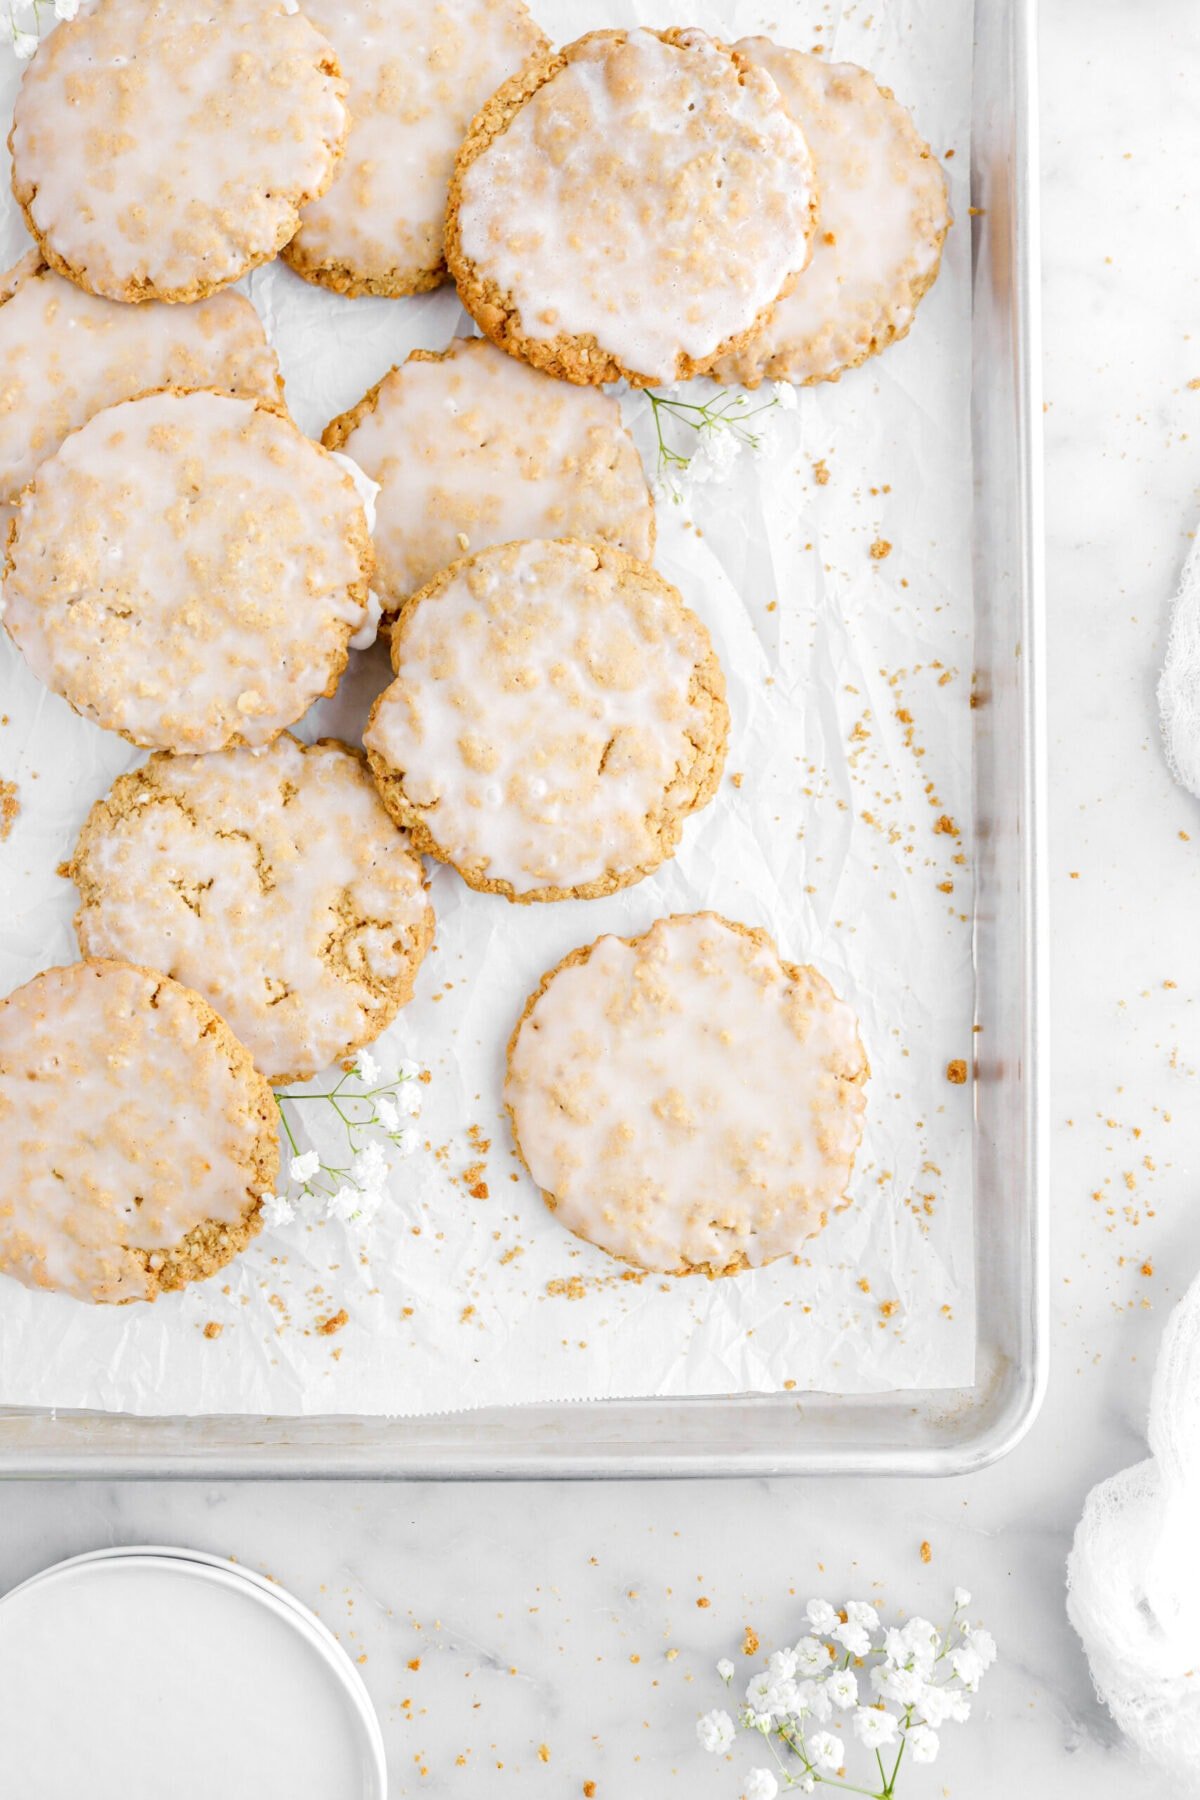 iced oatmeal cookies on lined sheet pan with cookie crumbs and white flowers around, a stack of white plates and white cheesecloth on marble surface next to pan.